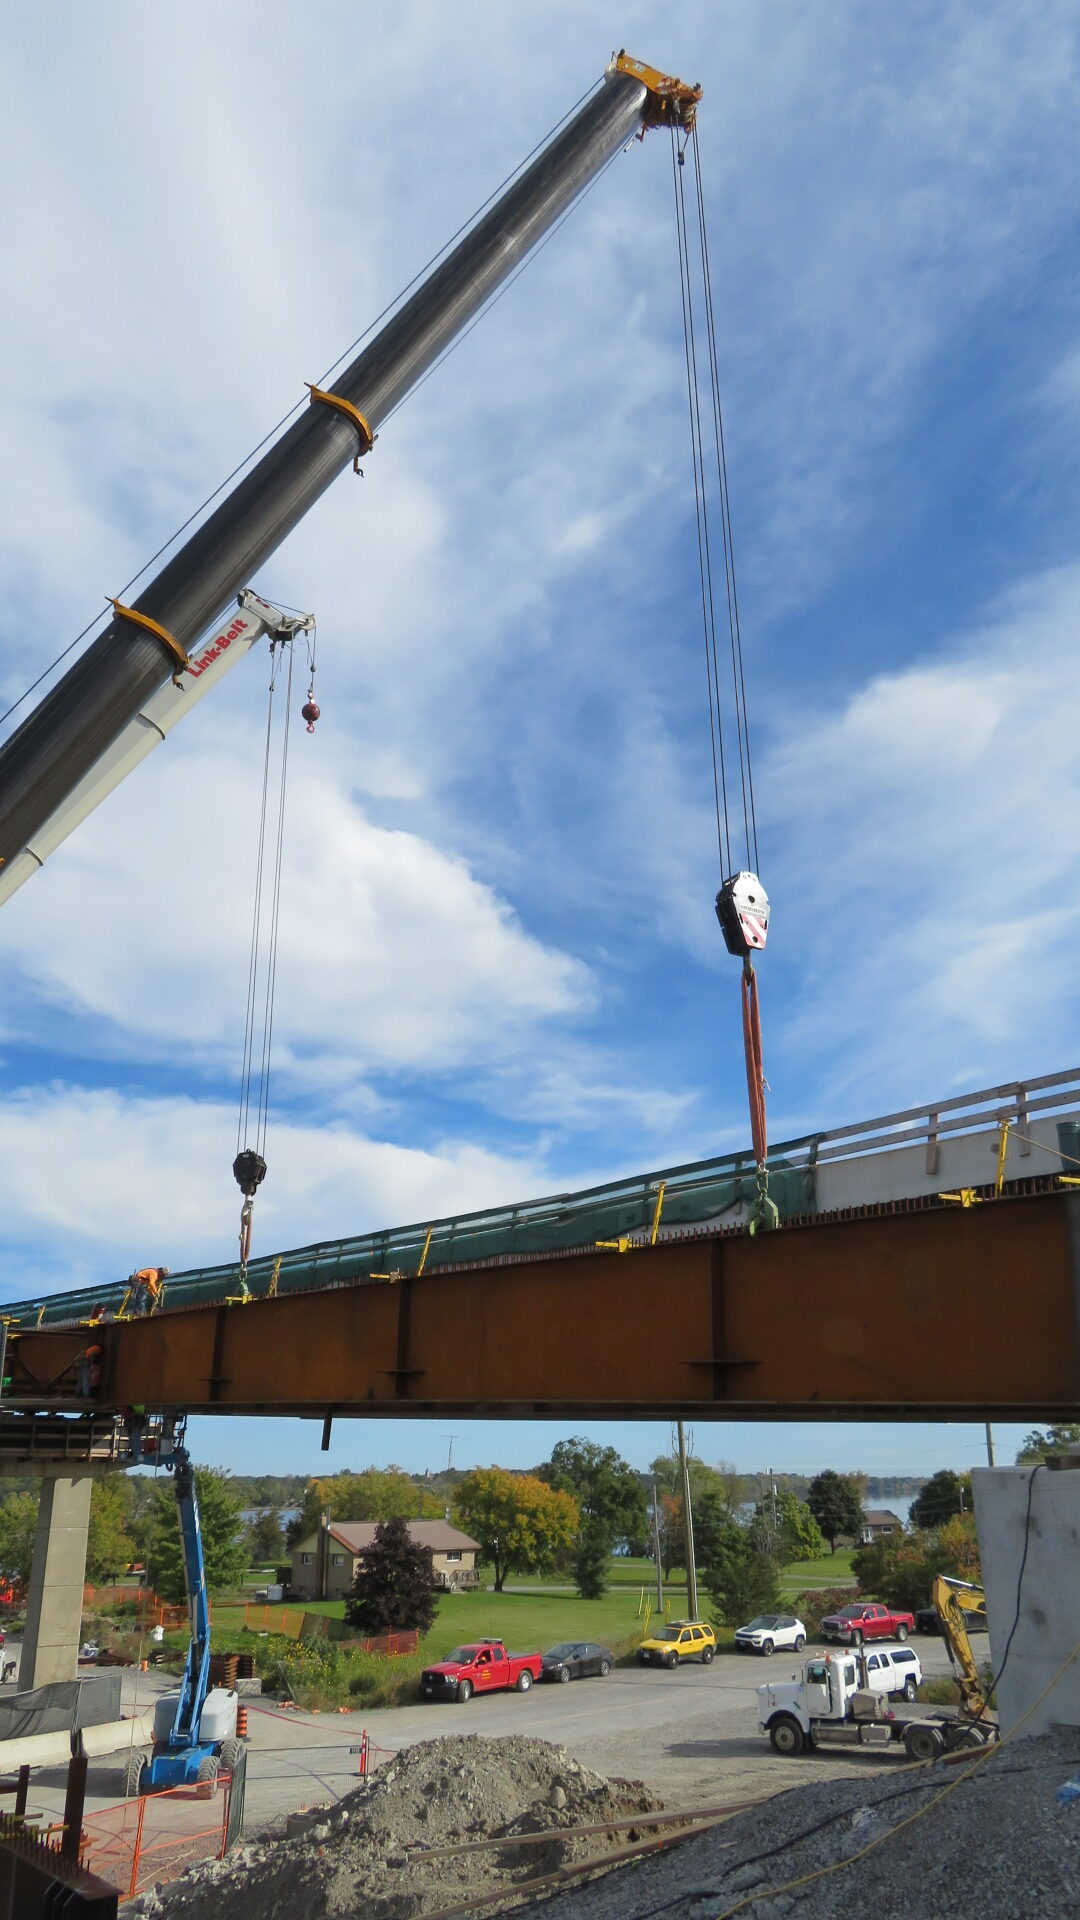 Expanded view of the 160 and 200 ton cranes, second last girder